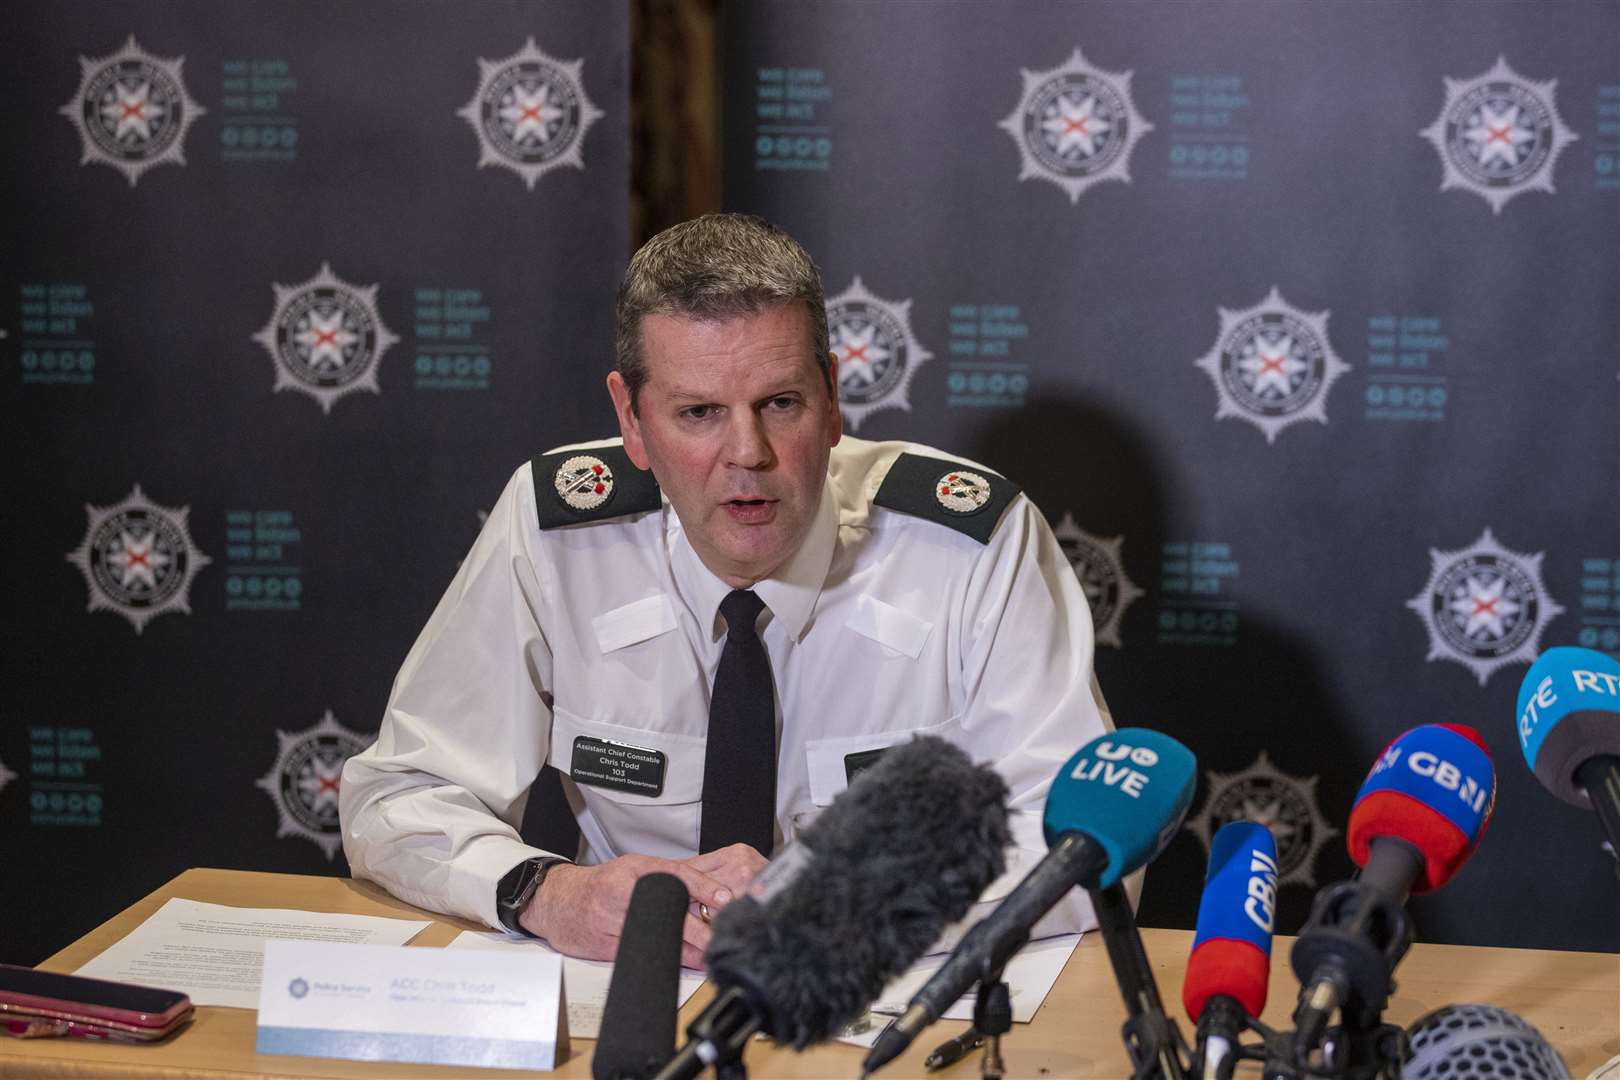 Police Service of Northern Ireland Assistant Chief Constable Chris Todd, from the Operational Support Department, during a briefing at the Stormont Hotel in Belfast (Liam McBurney/PA)